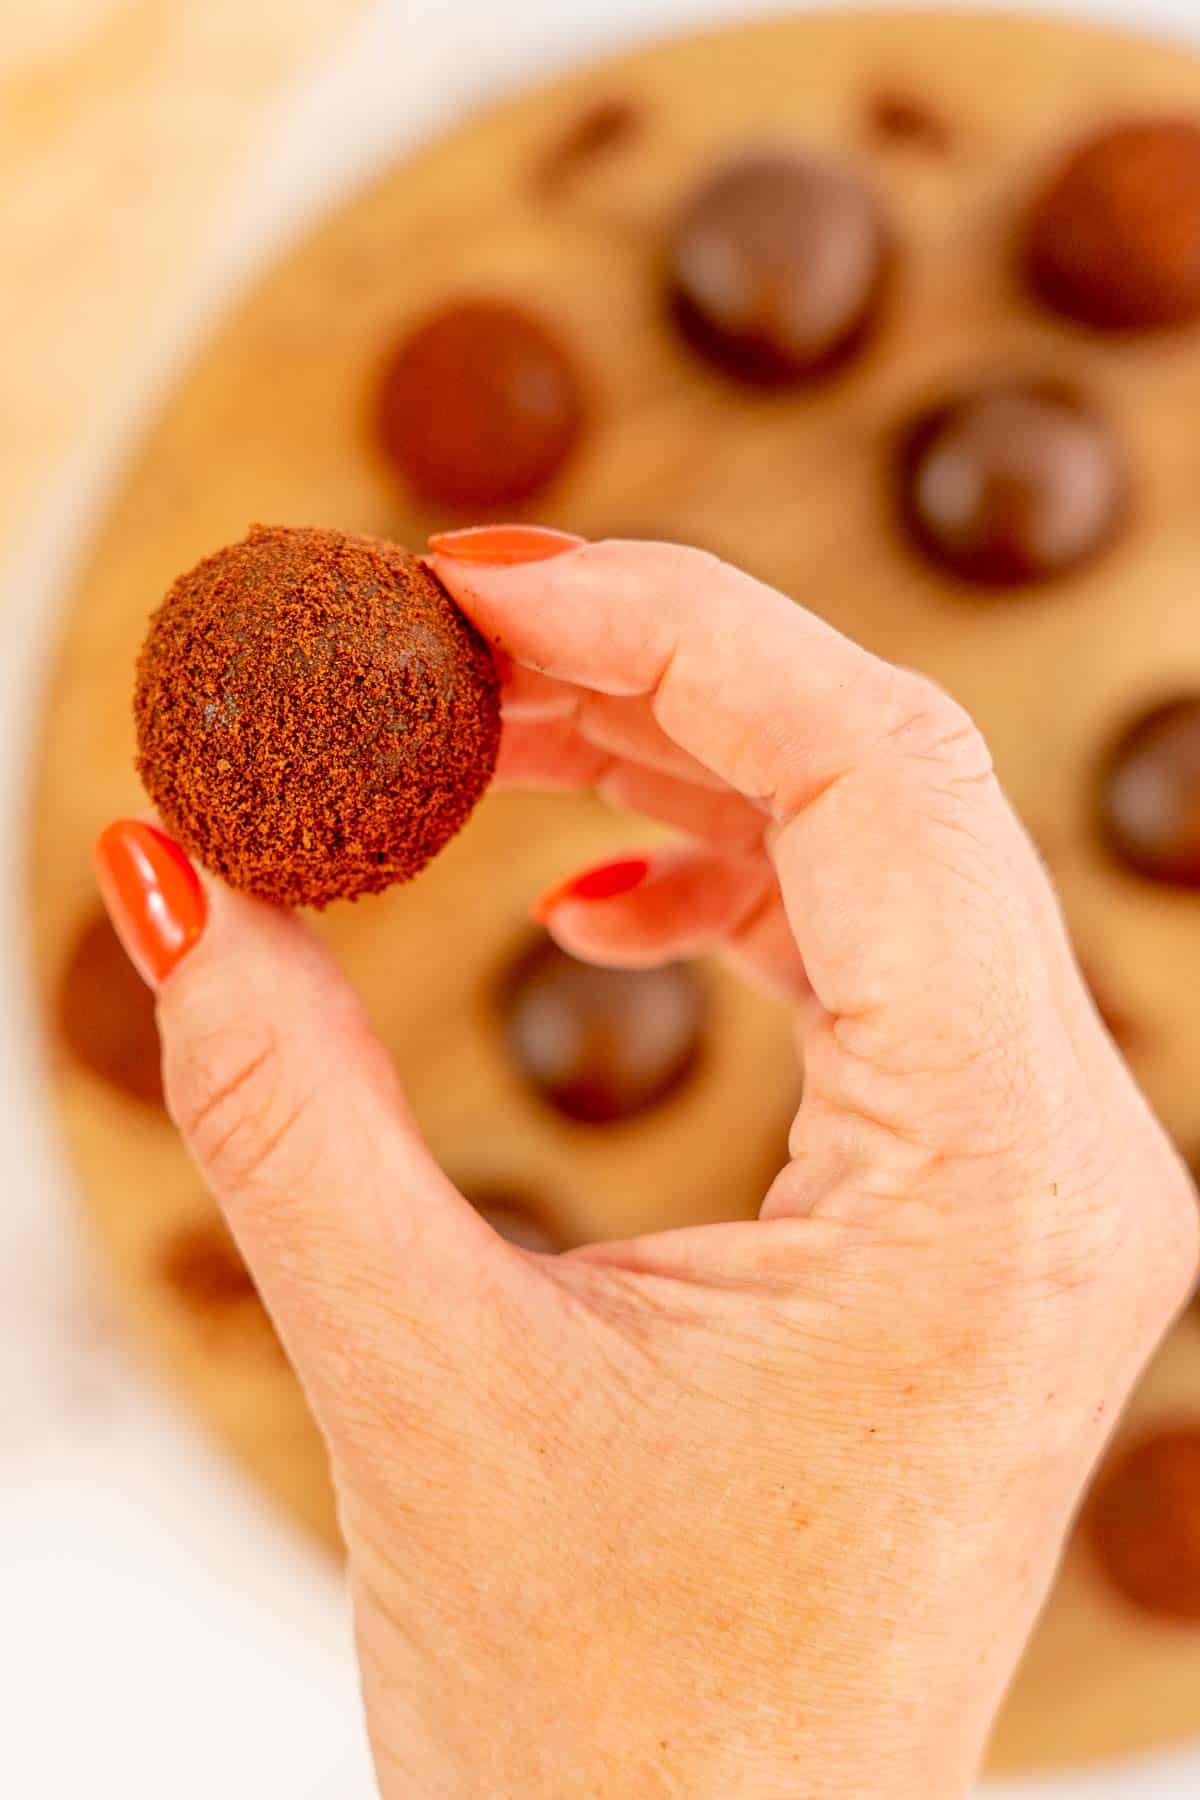 A woman's hand holding a milo ball above a wooden serving board of milo balls.